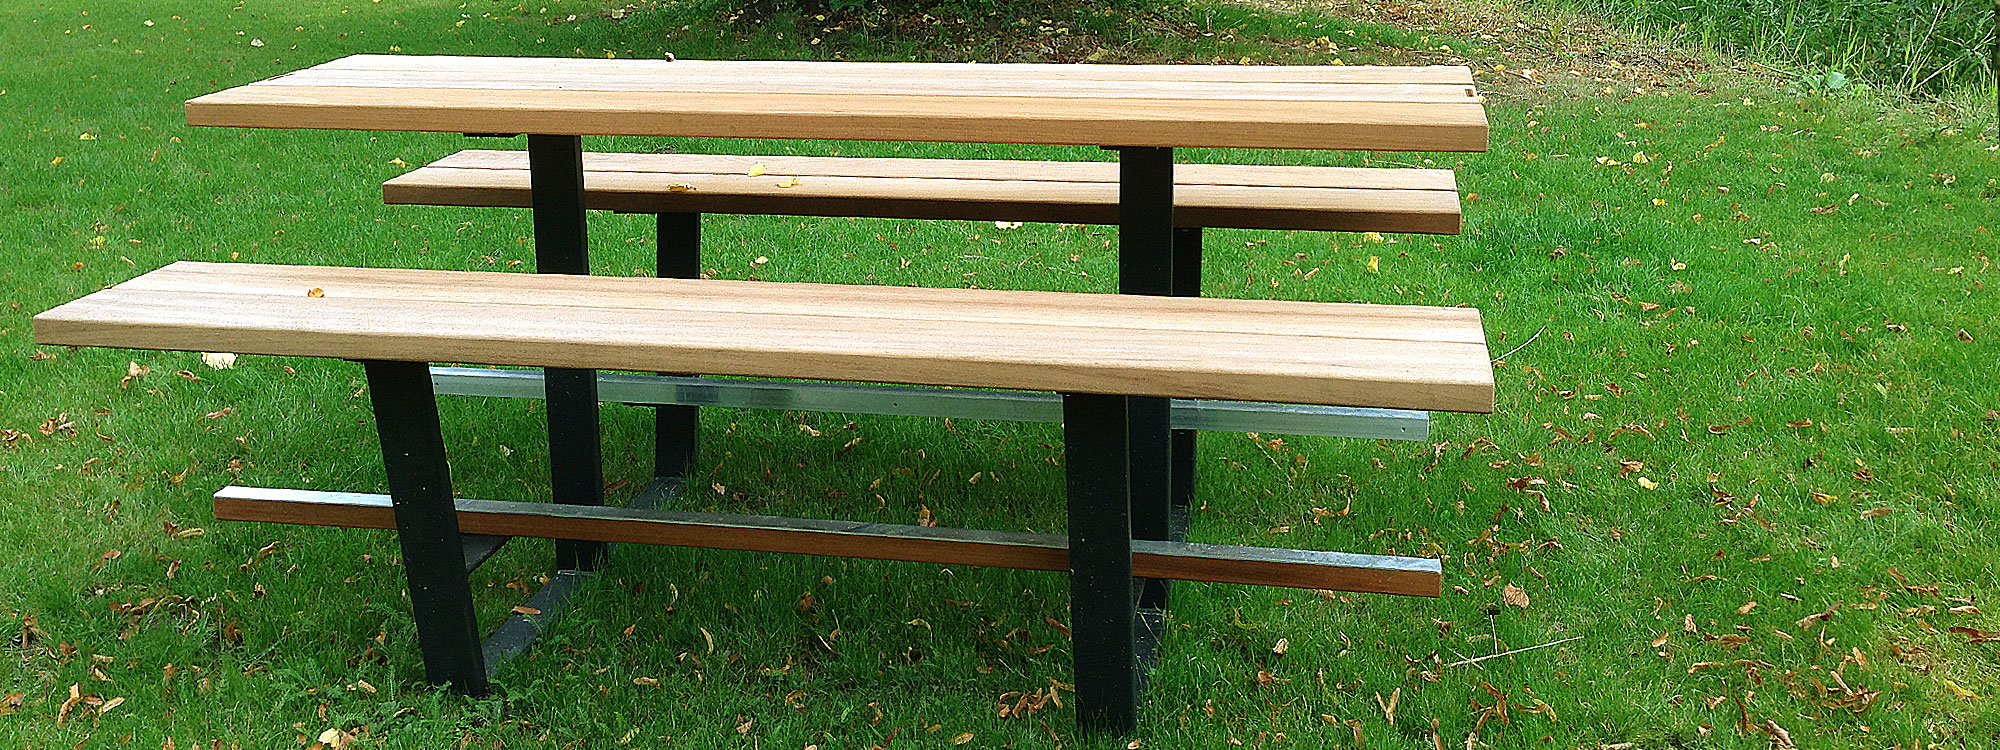 Cassecroute BEER TABLE Is A HIGH Bar TABLE And BENCHES In ALL WEATHER Picnic FURNITURE Materials. Residential & Hospitality MODERN Picnic Tables.